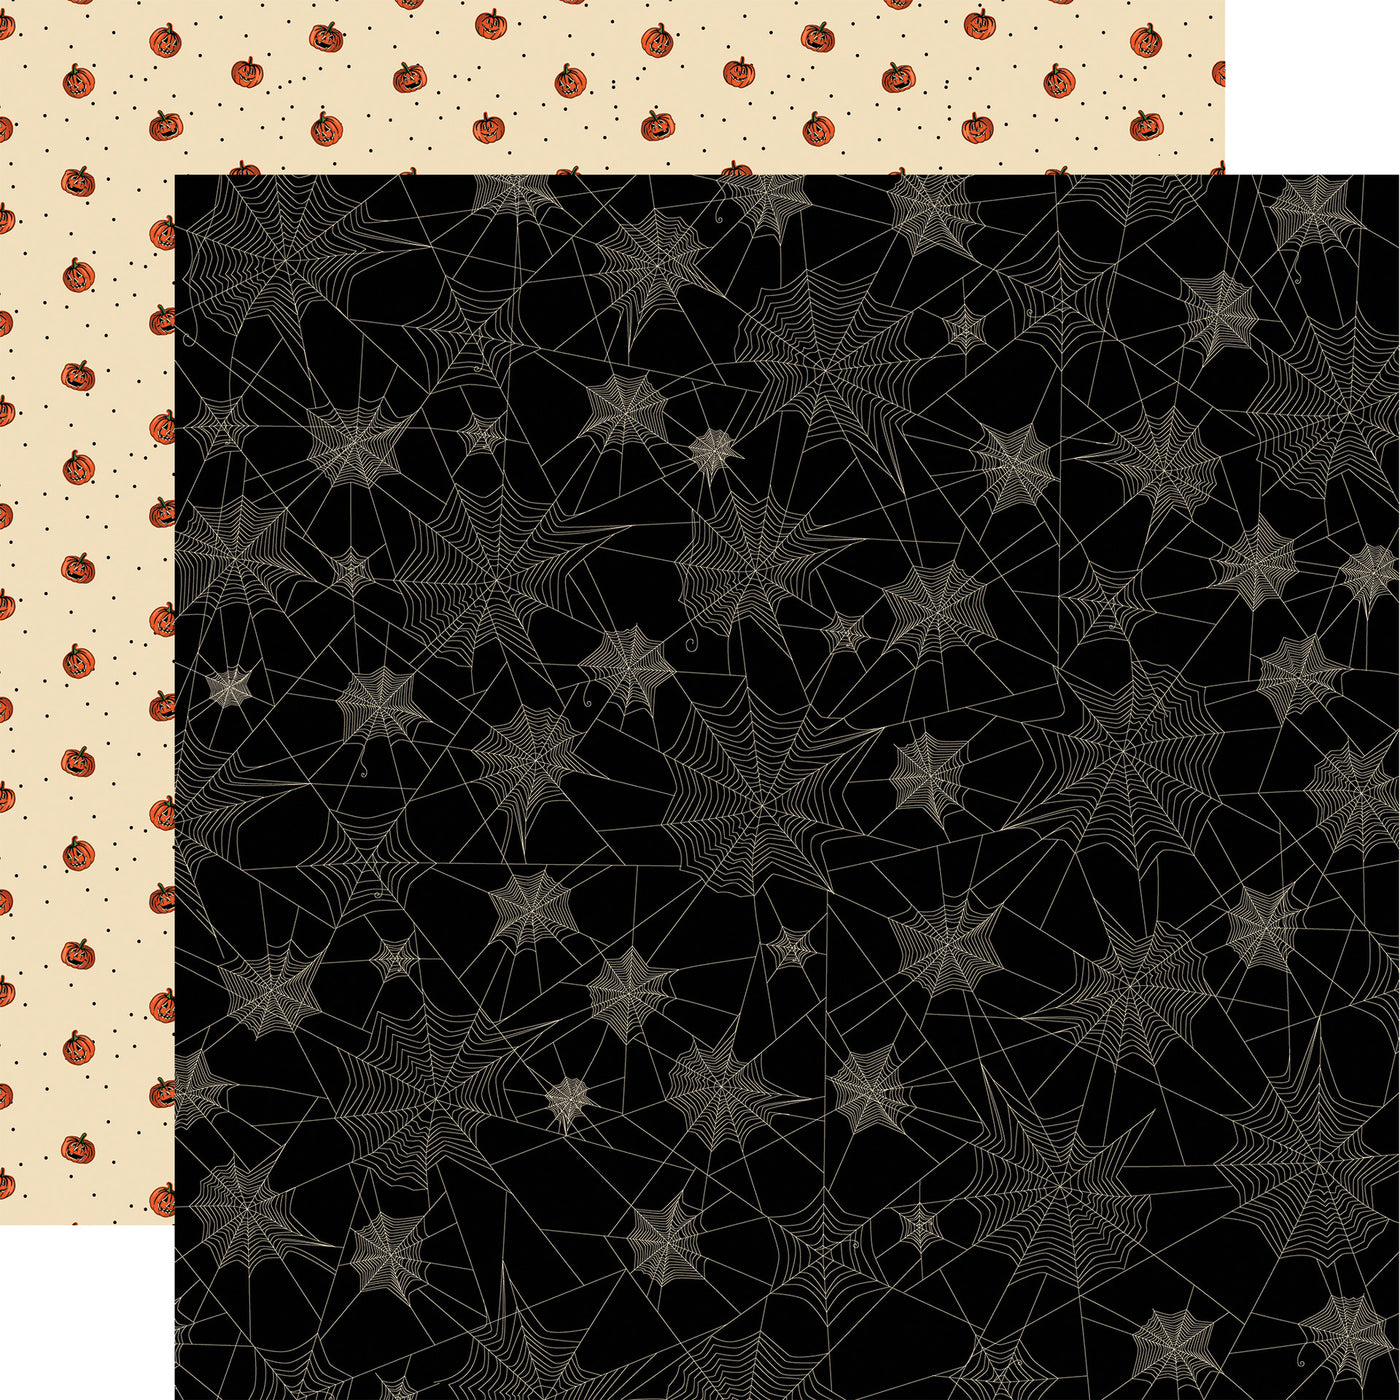 Double-sided 12x12 cardstock. (Side A - spider webs all over on a black background, and Side B - little pumpkins and dots on a cream background) Acid free